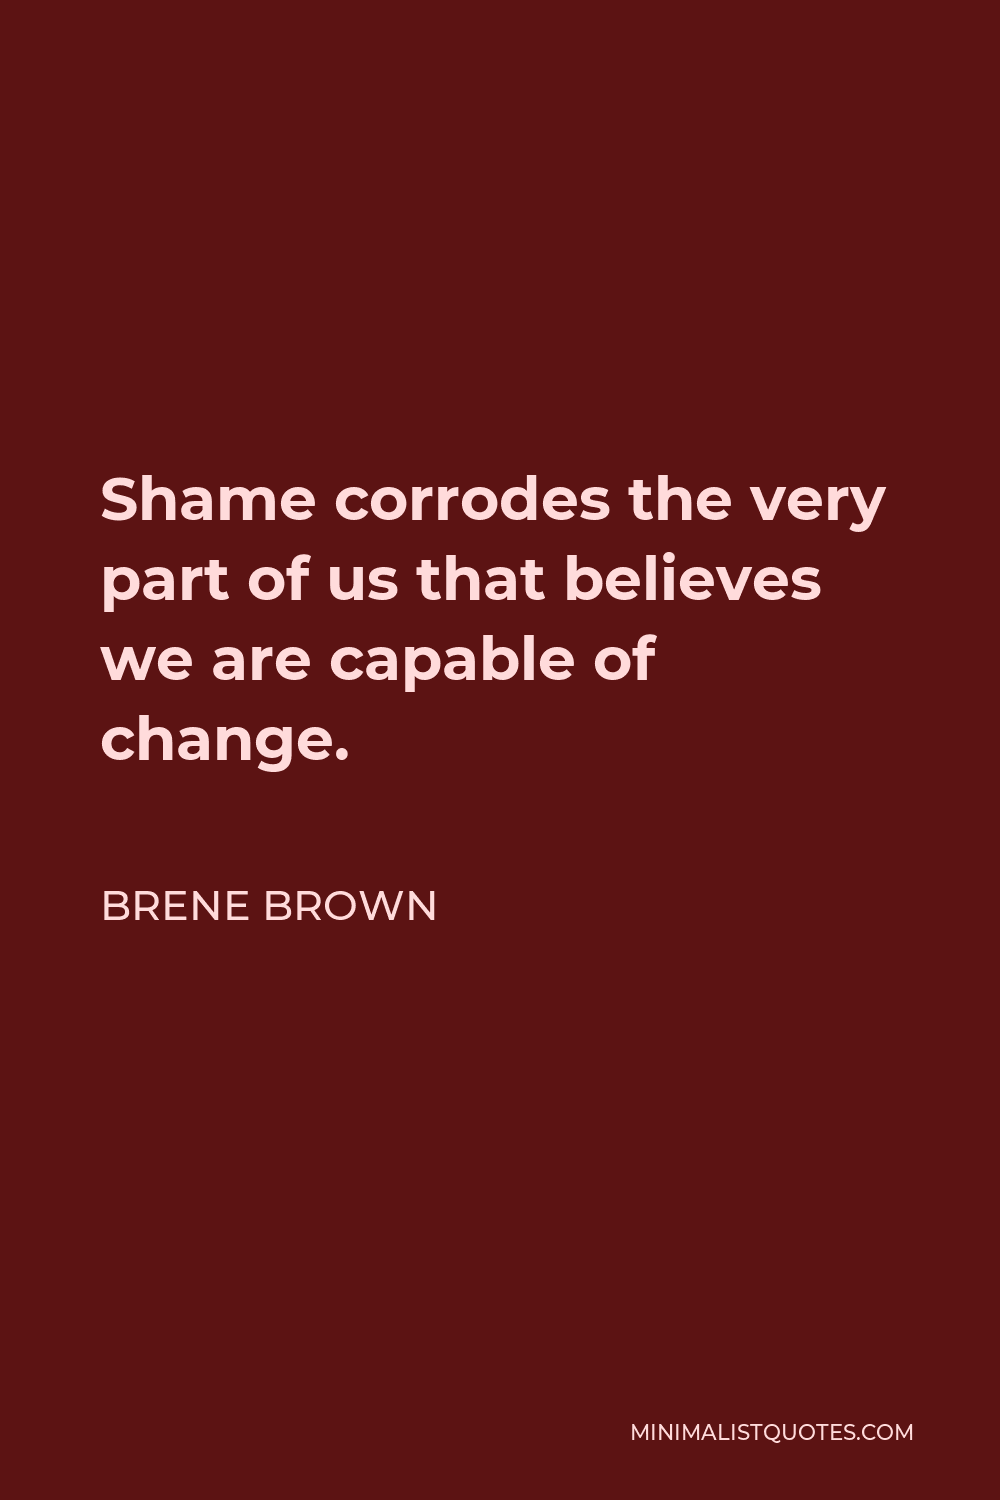 Brene Brown Quote: Shame corrodes the very part of us that believes we ...